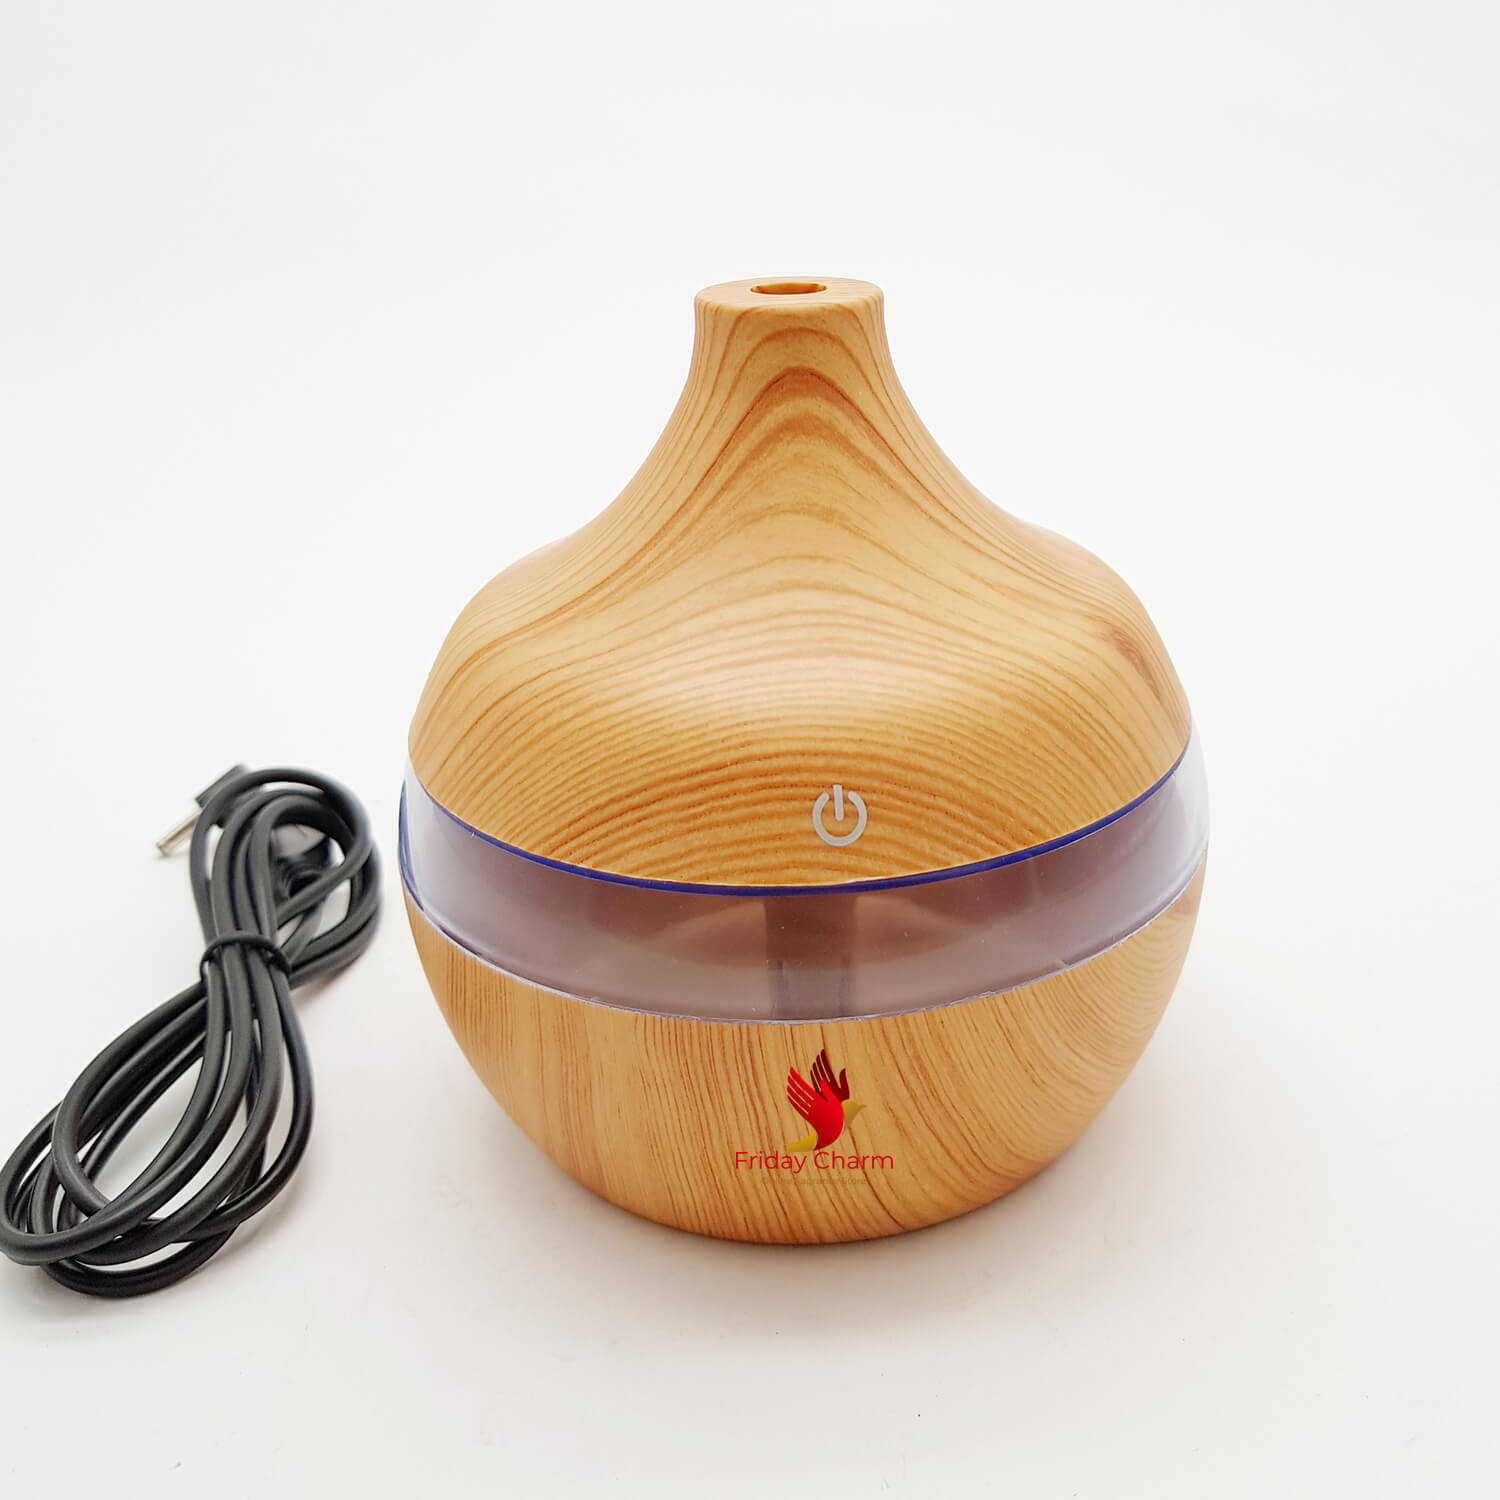 Electrical Aroma Oil Diffuser With Aroma Oil 1031 - Light Brown